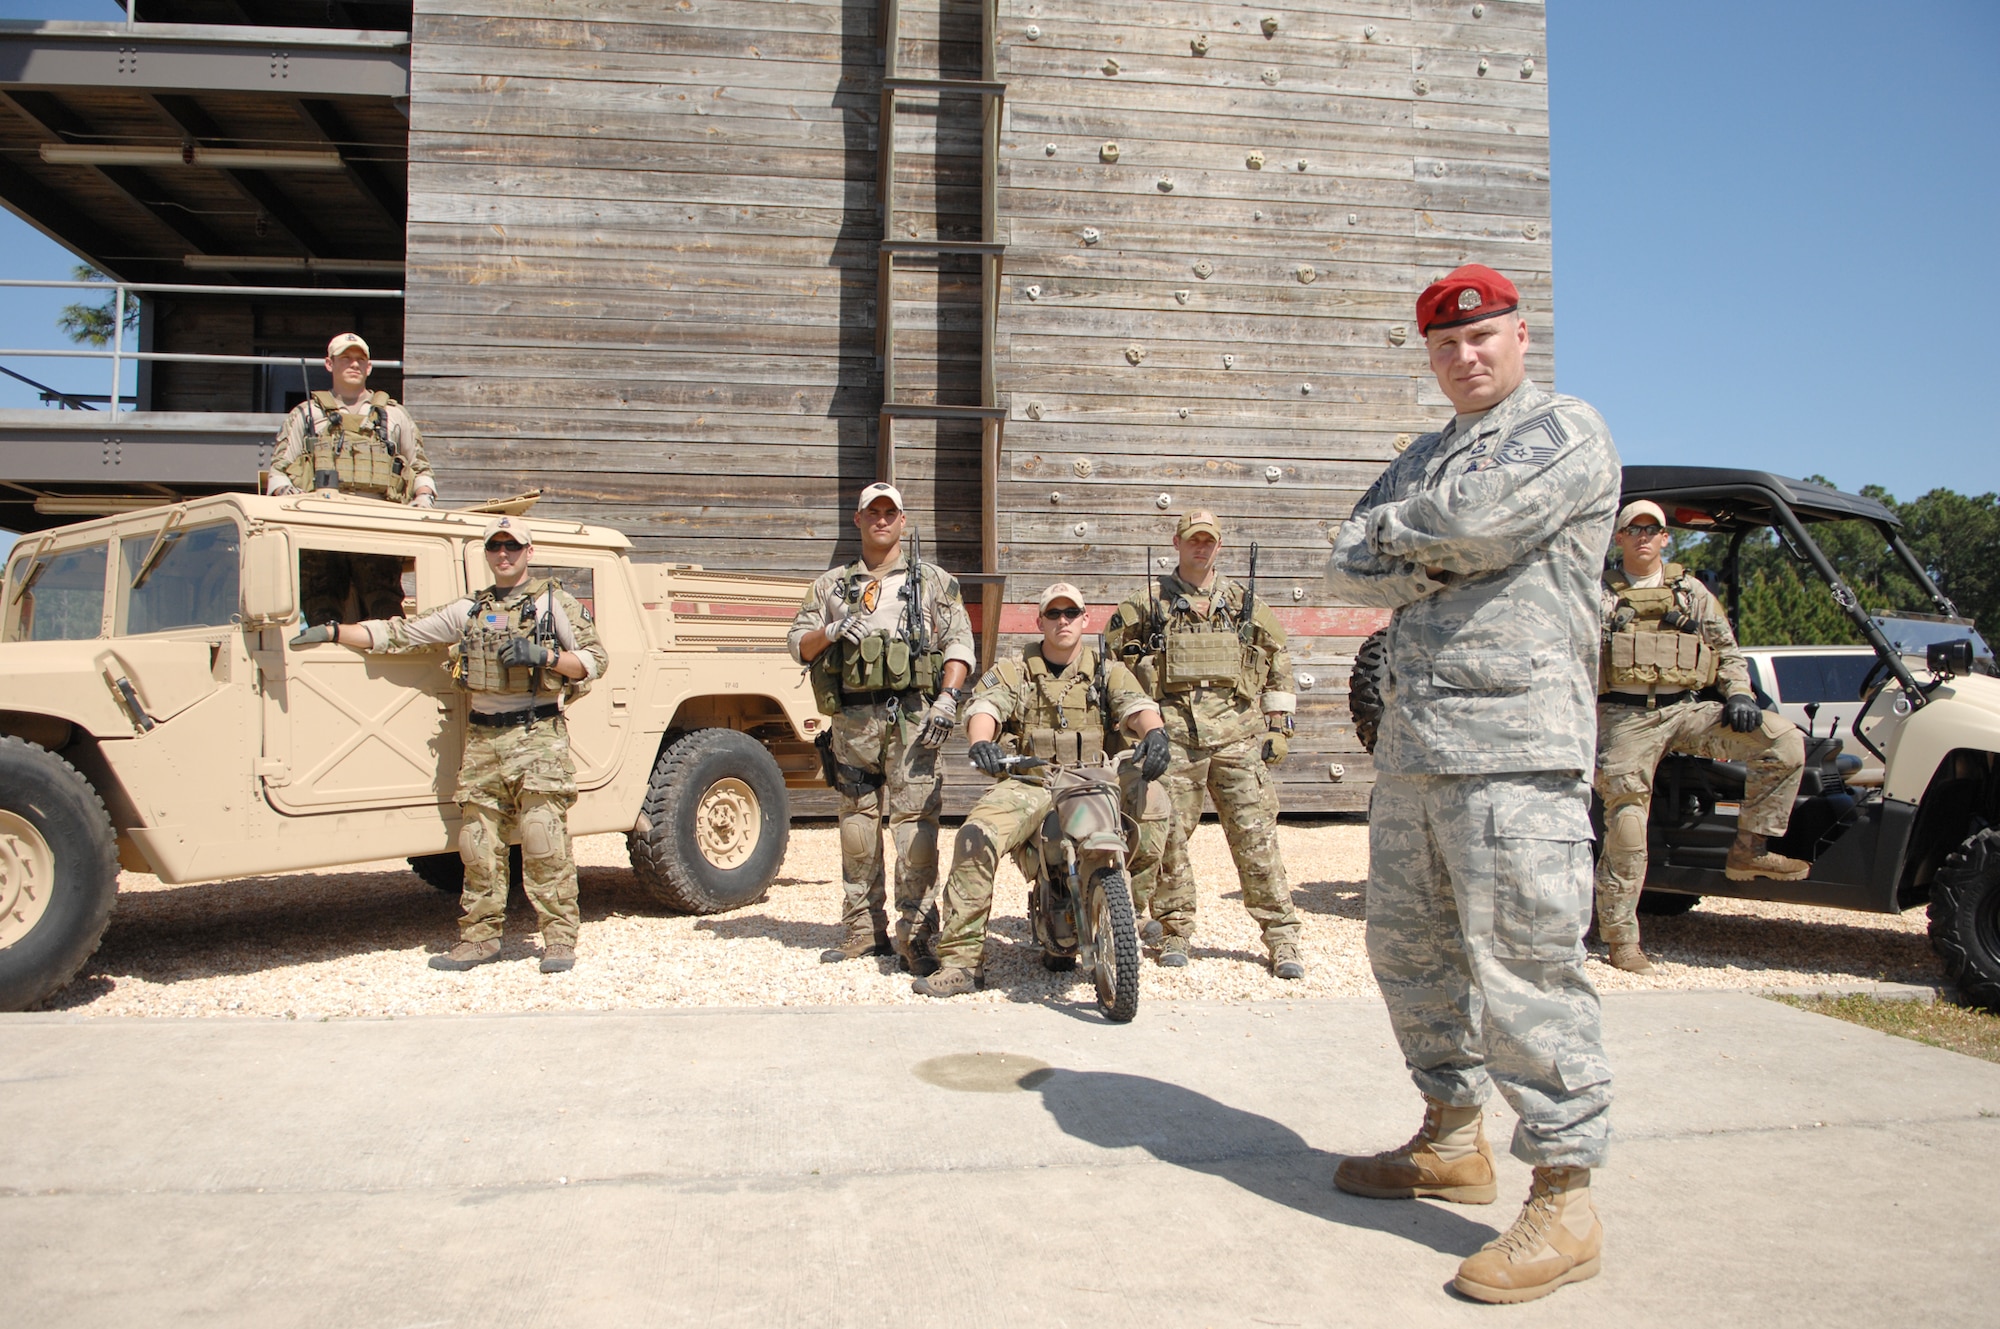 Chief Master Sgt. Antonio Travis has been recognized by editors of TIME Magazine as one of the 100 most influential people in the world for his efforts after the Haiti earthquake.  Chief Travis is shown here with combat controllers (from left) Senior Airman William Barrett, Staff Sgt. Kyle Graman,  Staff Sgt. Jose Diaz, Staff Sgt. Joshua Craig, Staff Sgt. Chad Rosendale and Senioir Airman Johnnie Yellock.  (U.S. Air Force photo)